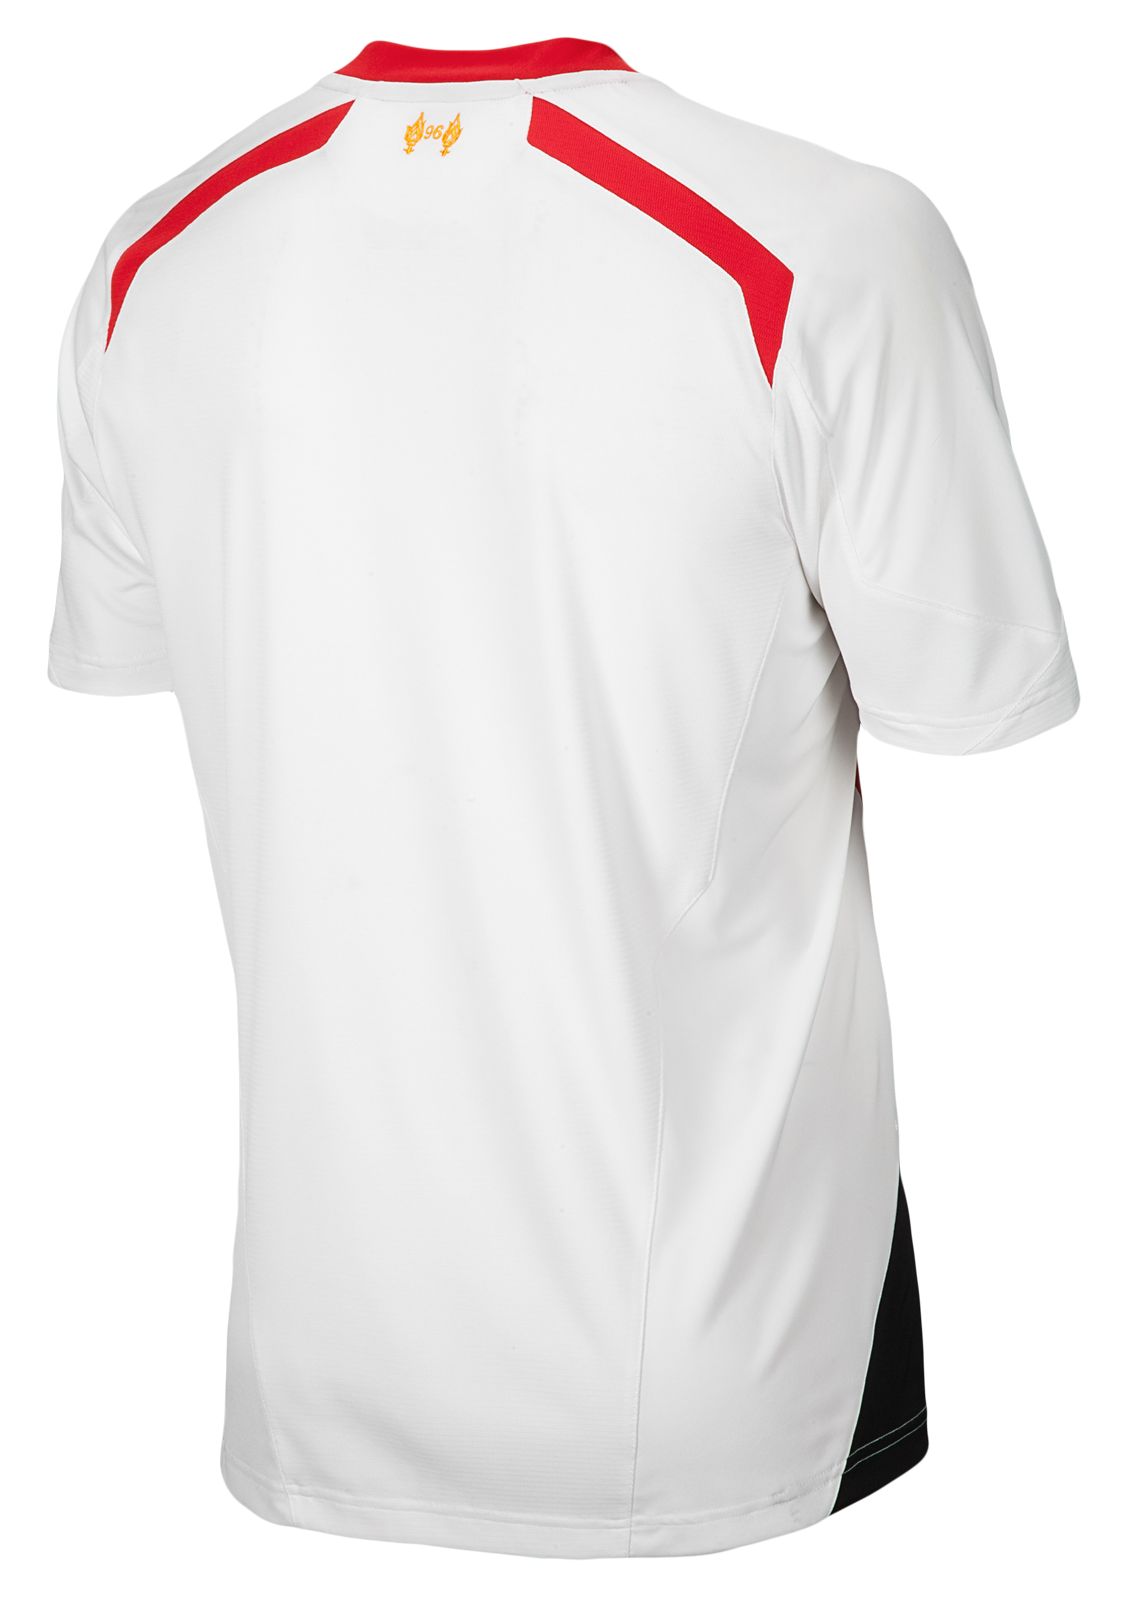 Liverpool Away Short Sleeve Jersey 2013/14, White with Anthracite & High Risk Red image number 0